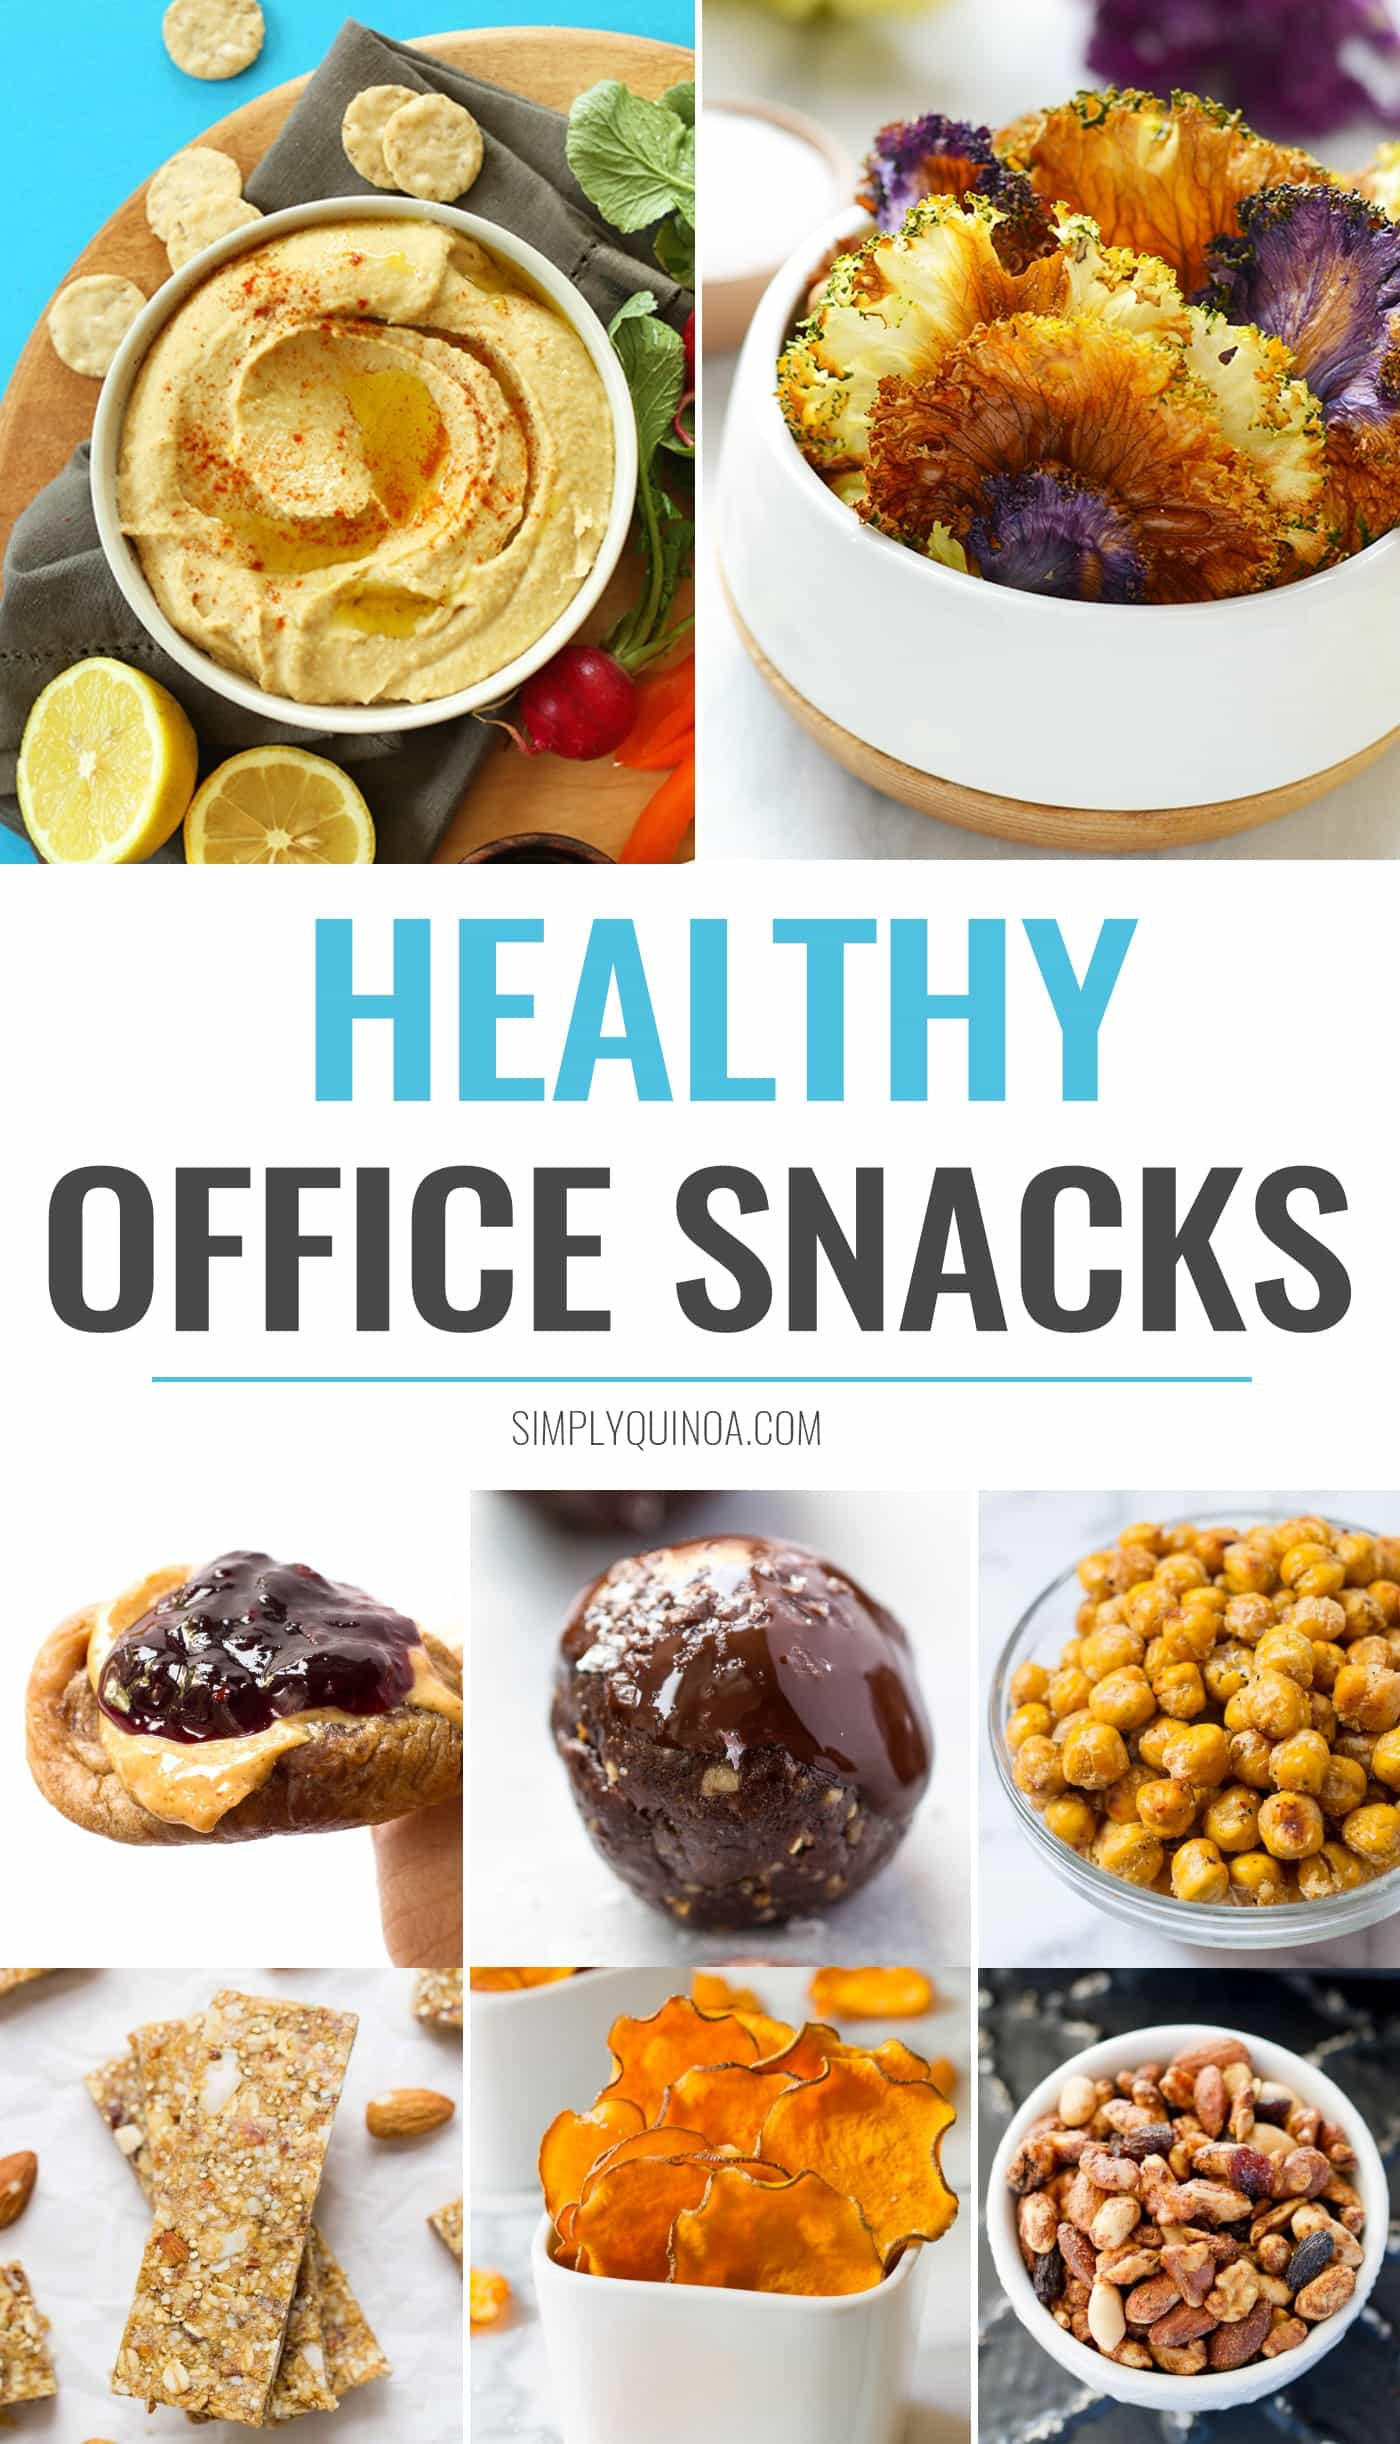 Healthy Snacks For The Office
 The 12 Best Healthy fice Snacks Simply Quinoa